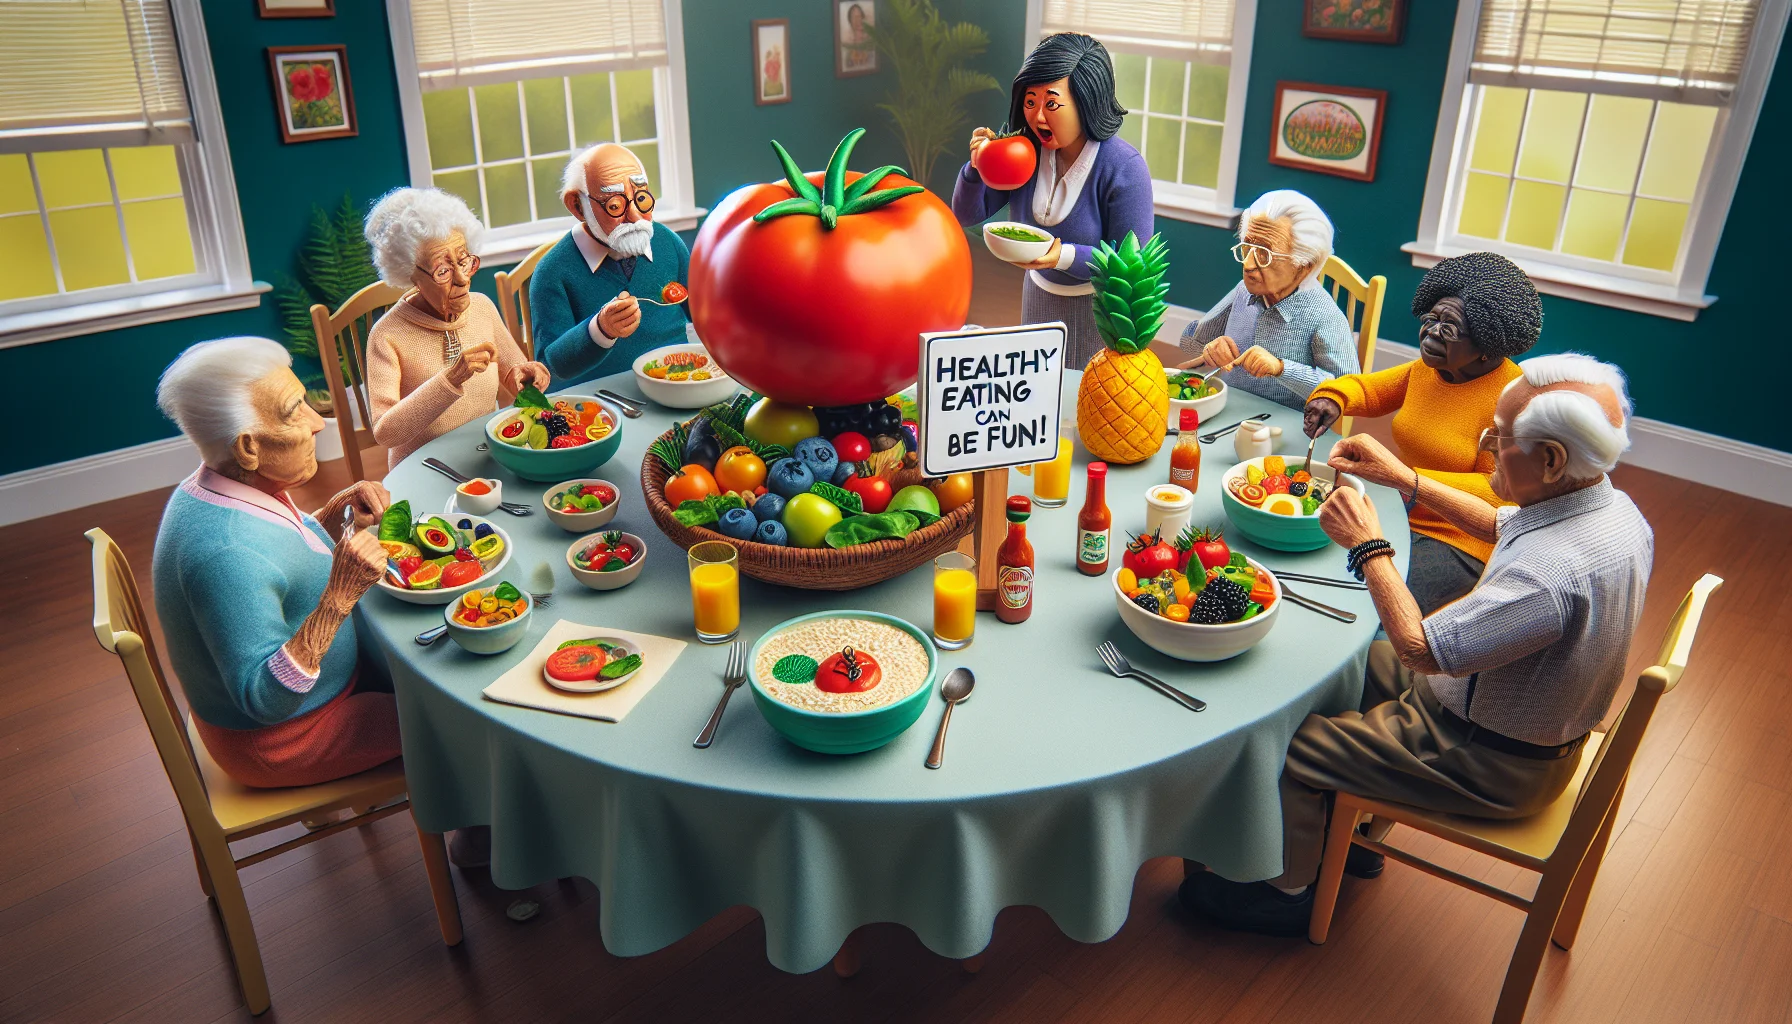 Create a whimsical yet realistic scene set in a vibrant retirement home dining room at breakfast time. A group of senior citizens are seated around a table filled with an array of colorful anti-inflammatory foods. An elderly Caucasian lady tries to balance a giant tomato on her head, much to the amusement of her friends. A South Asian man is nonchalantly spooning avocado onto his plate, while a black woman puts hot sauce onto her bowl of blueberries and spinach, and an Hispanic man is munching on pineapples with a comical enthusiasm. A miniature sign planted in a bowl of oatmeal at the center of the table humbly proclaims 'Healthy eating can be fun!'